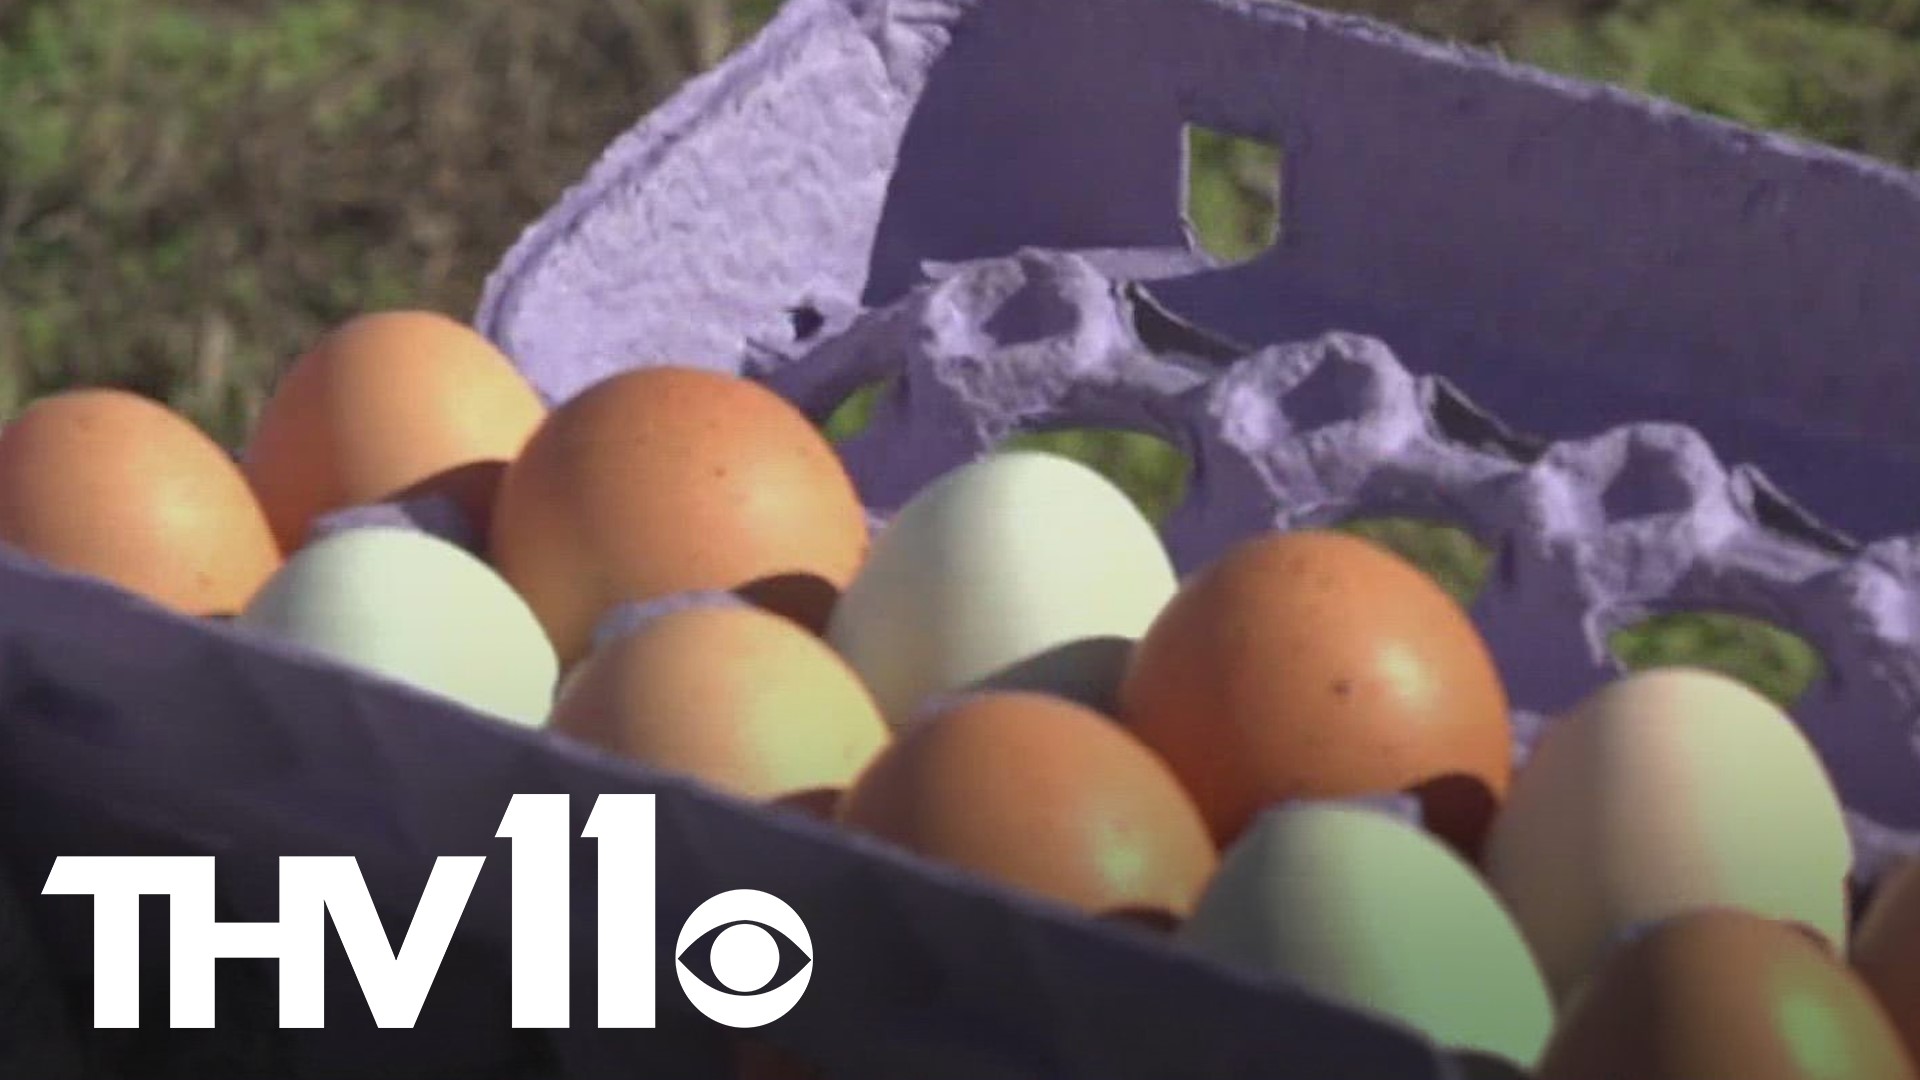 Though egg prices have risen across the country, one Arkansas farmer hasn't raised their prices in over 15 years.